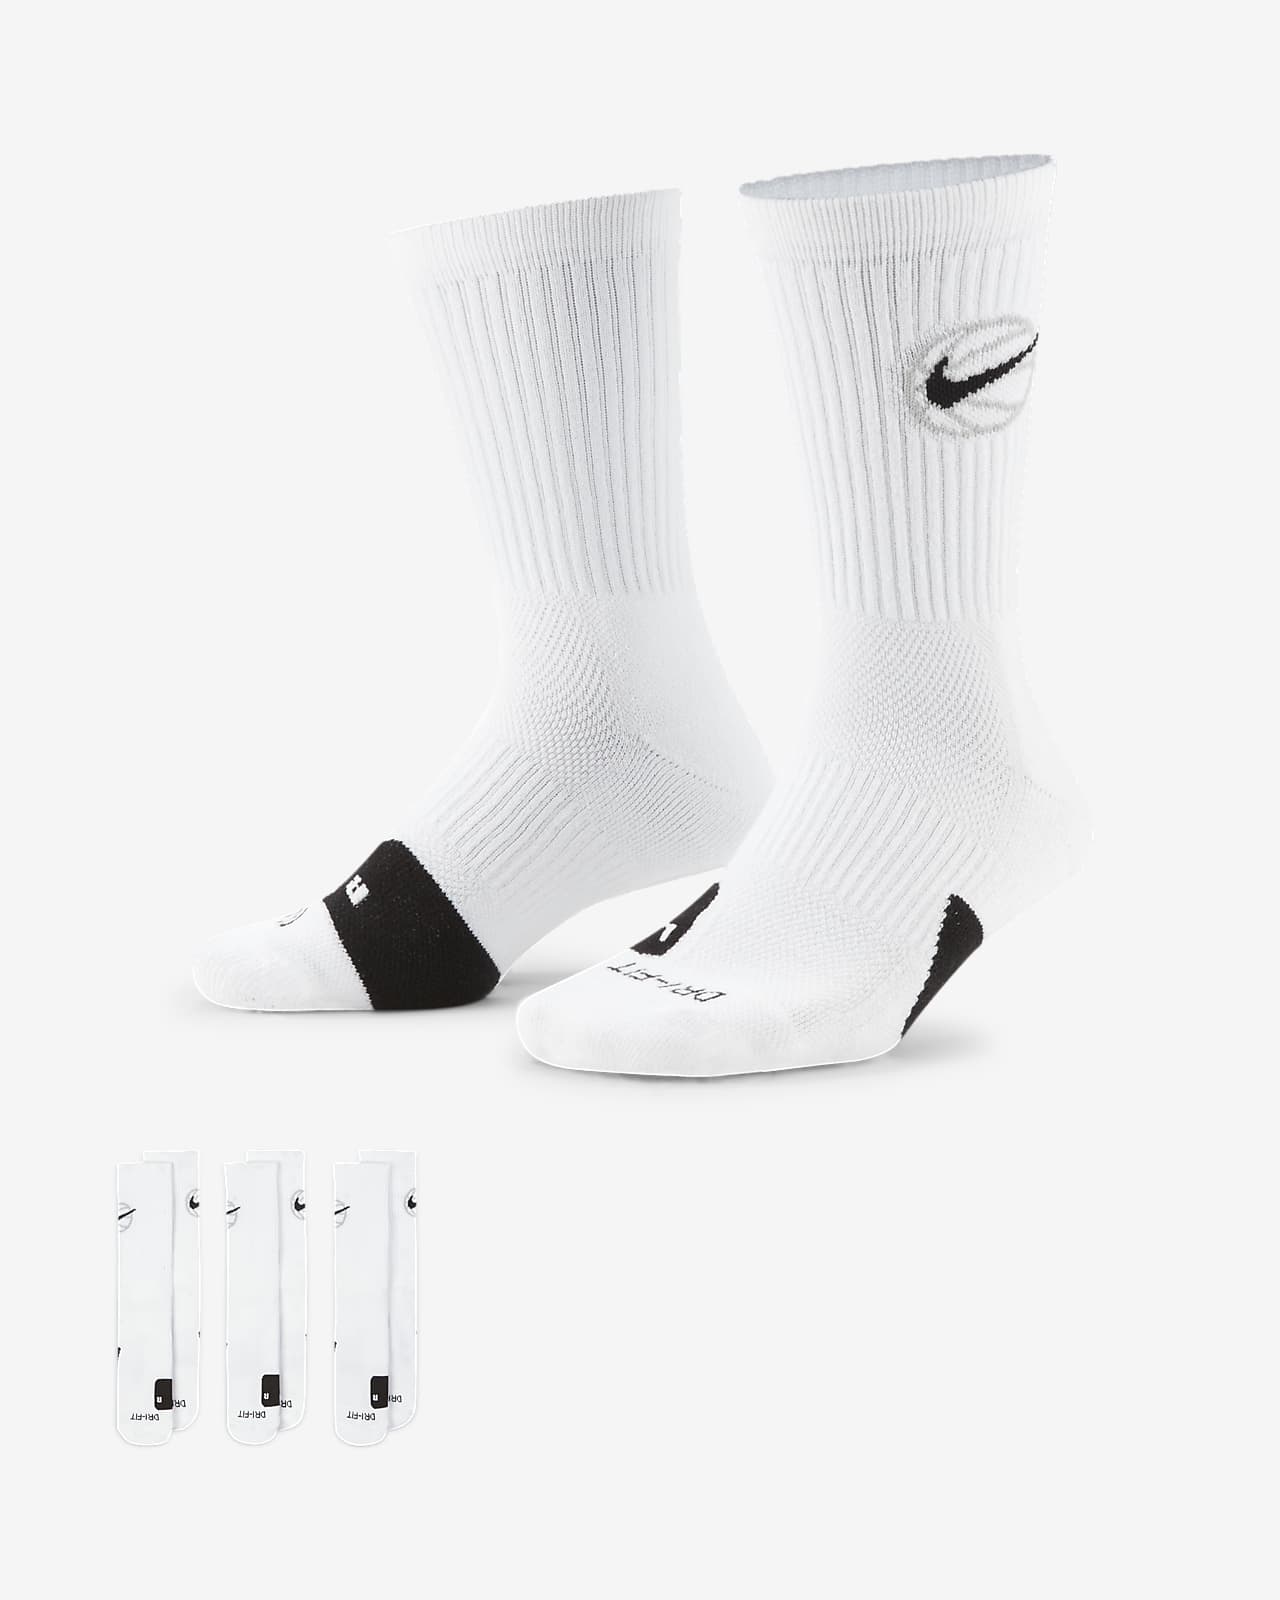 Chaussettes de basketball Nike Everyday Crew (3 paires)